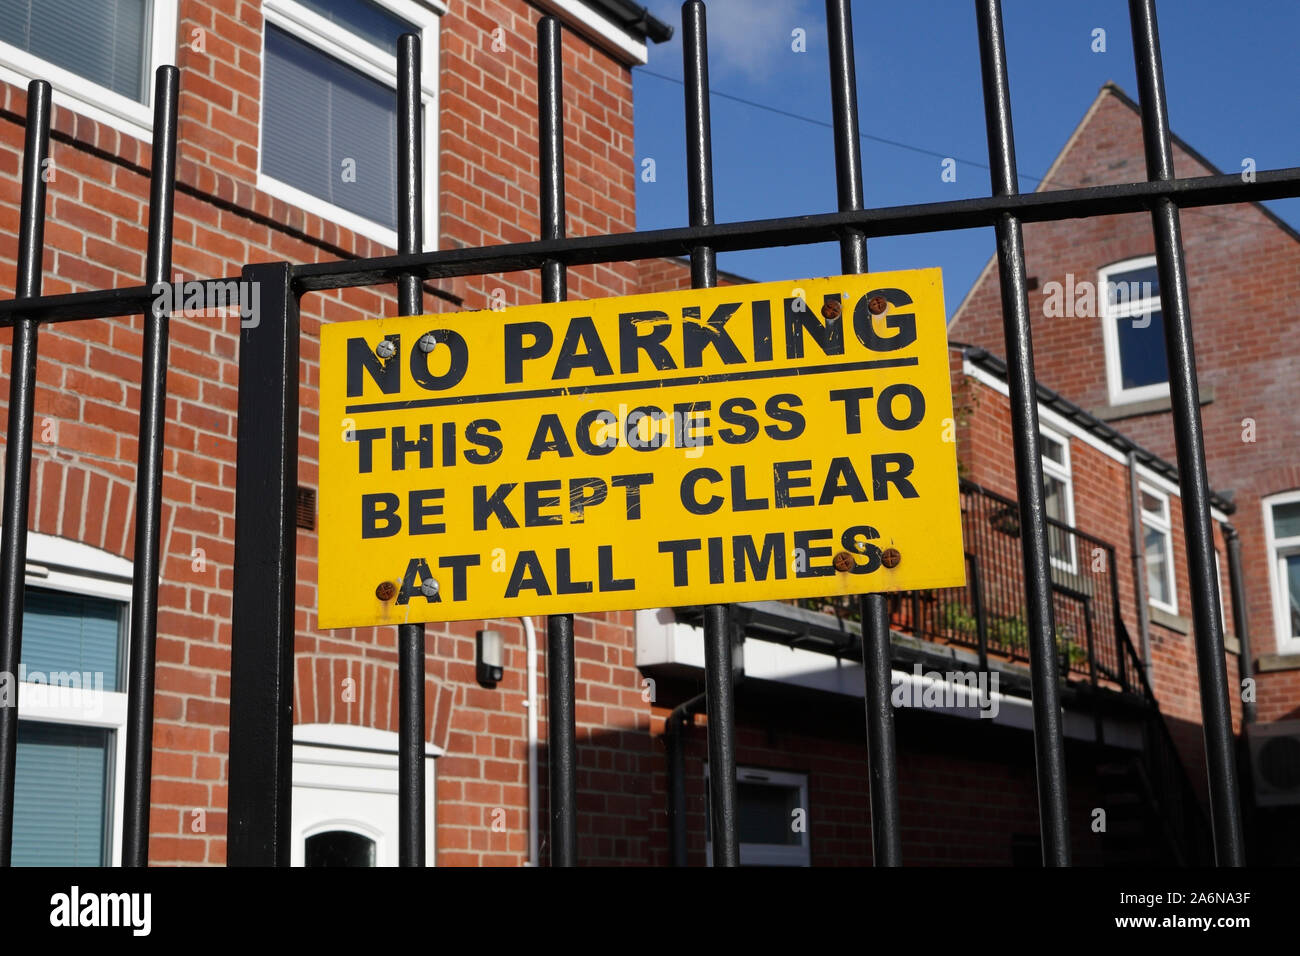 No parking sign on residential property Stock Photo